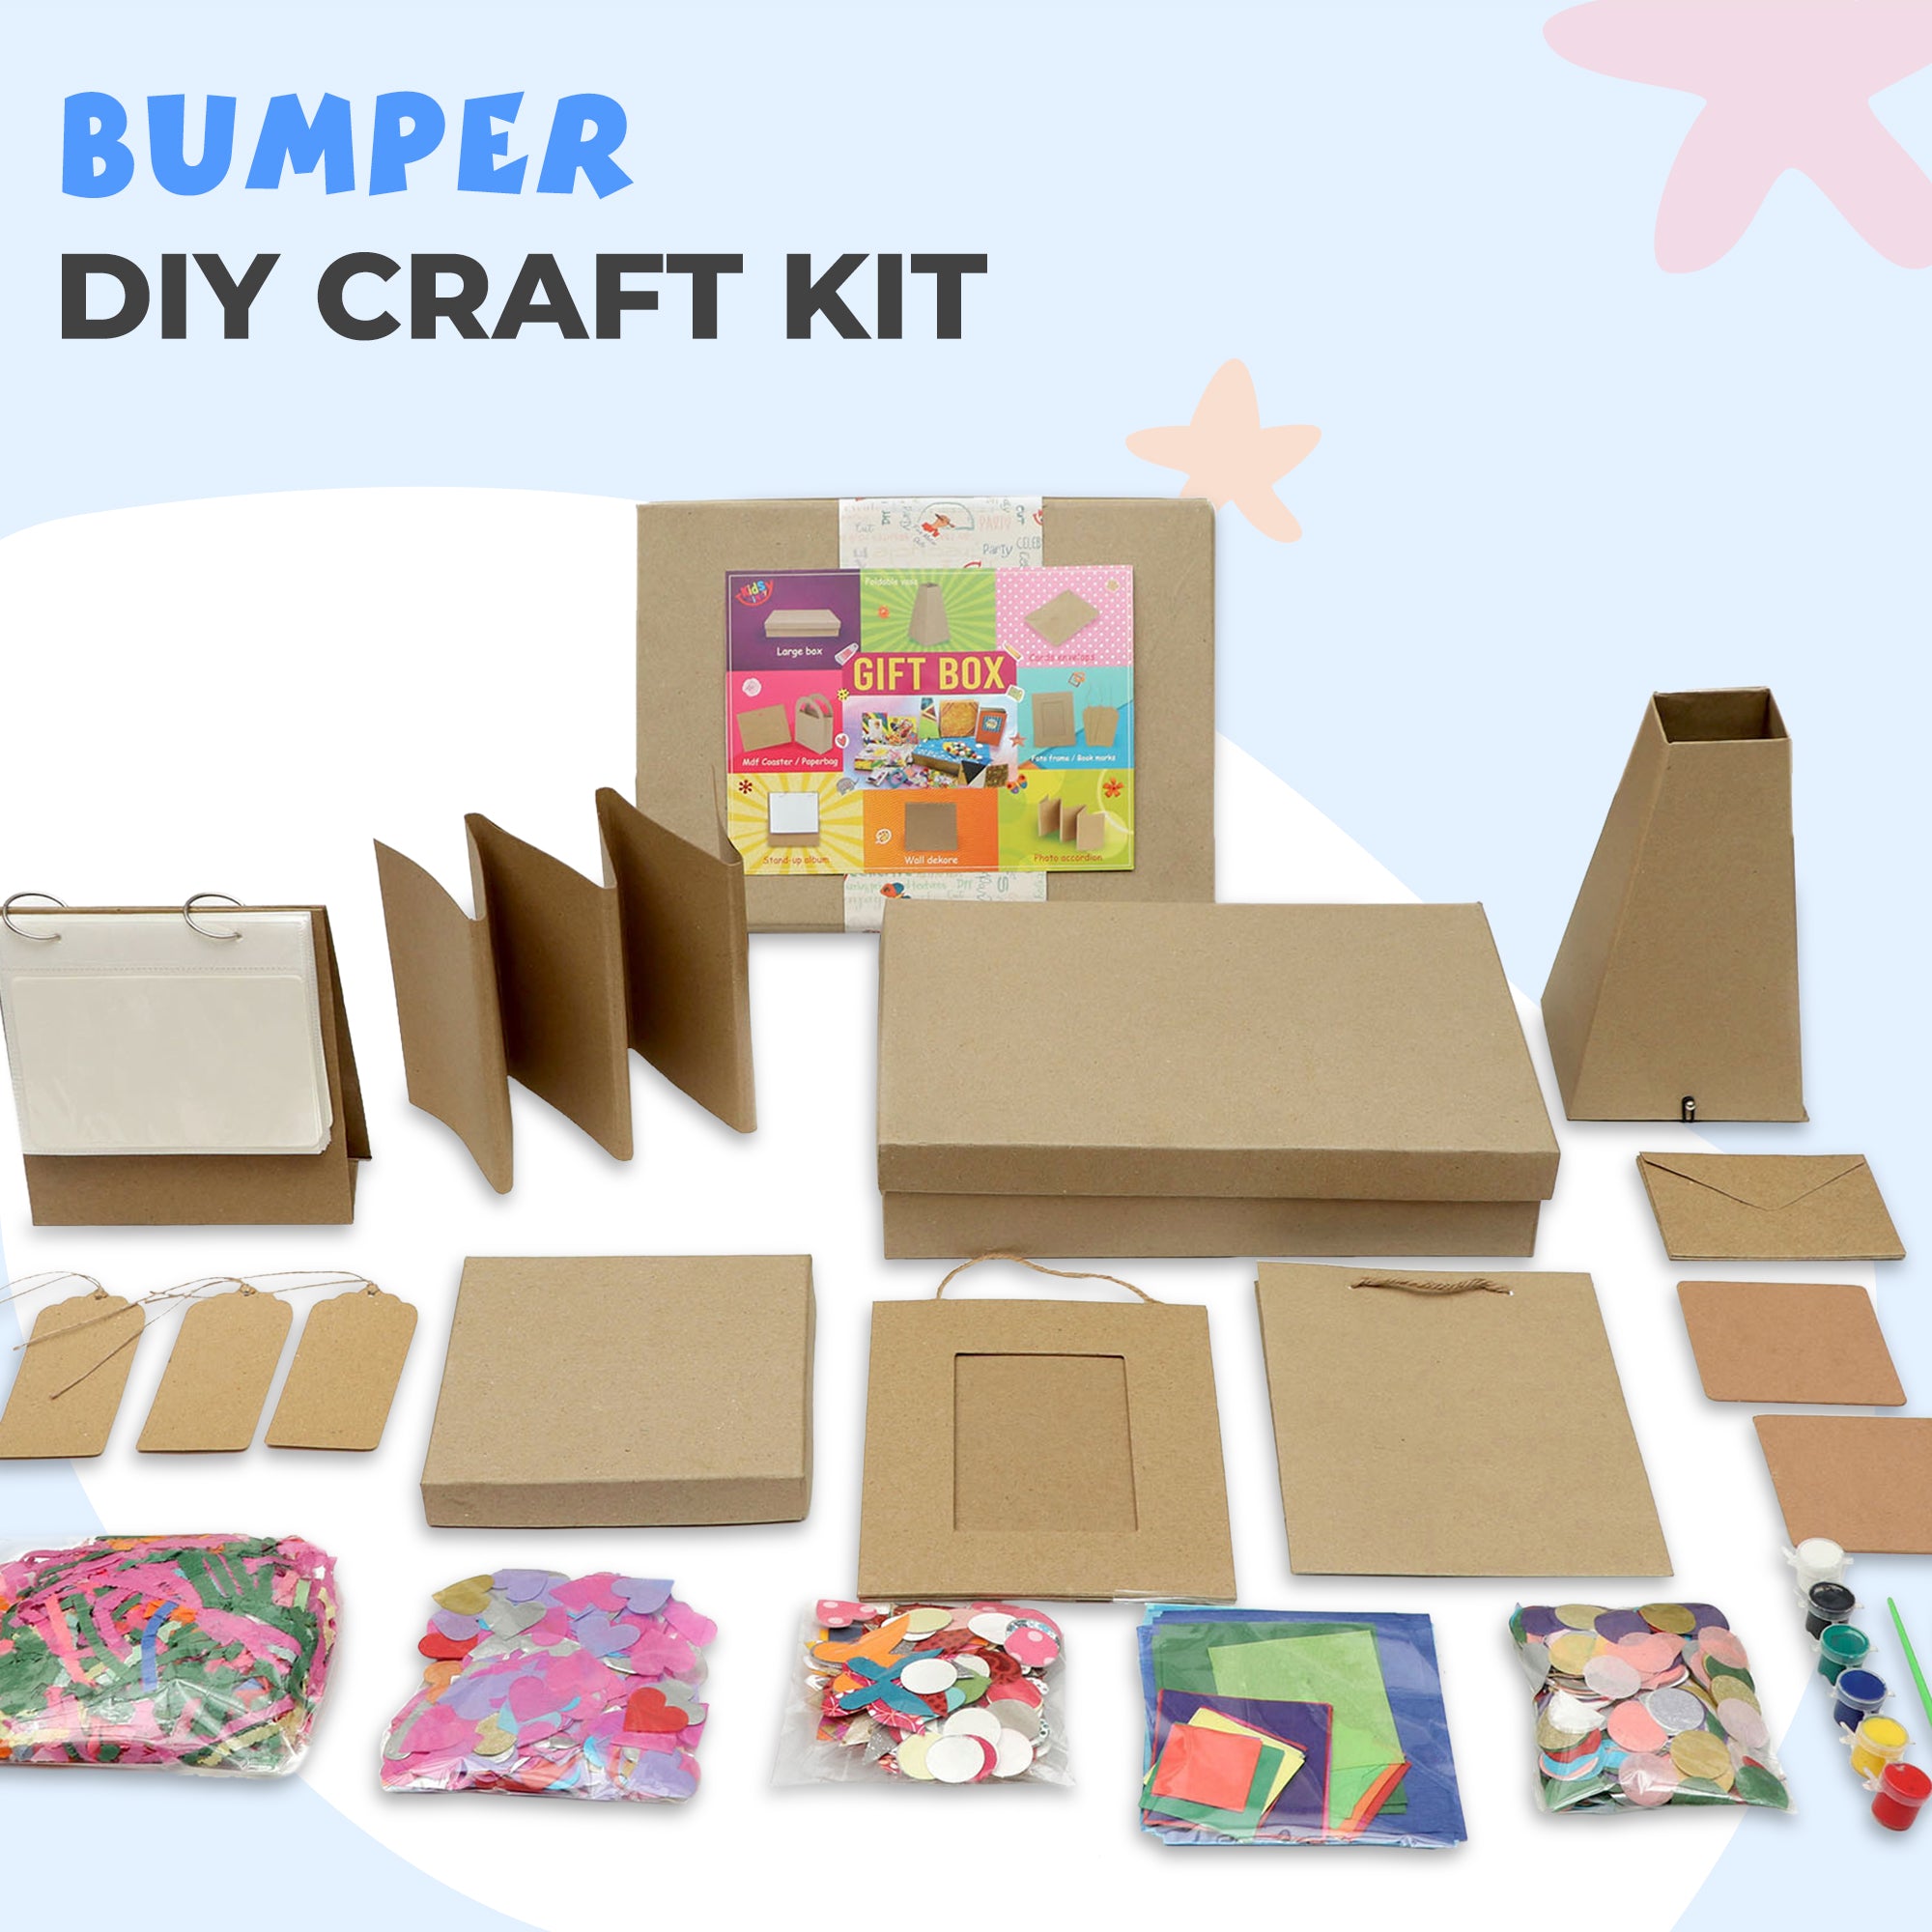 What would starting a craft kit business make possible for YOU?